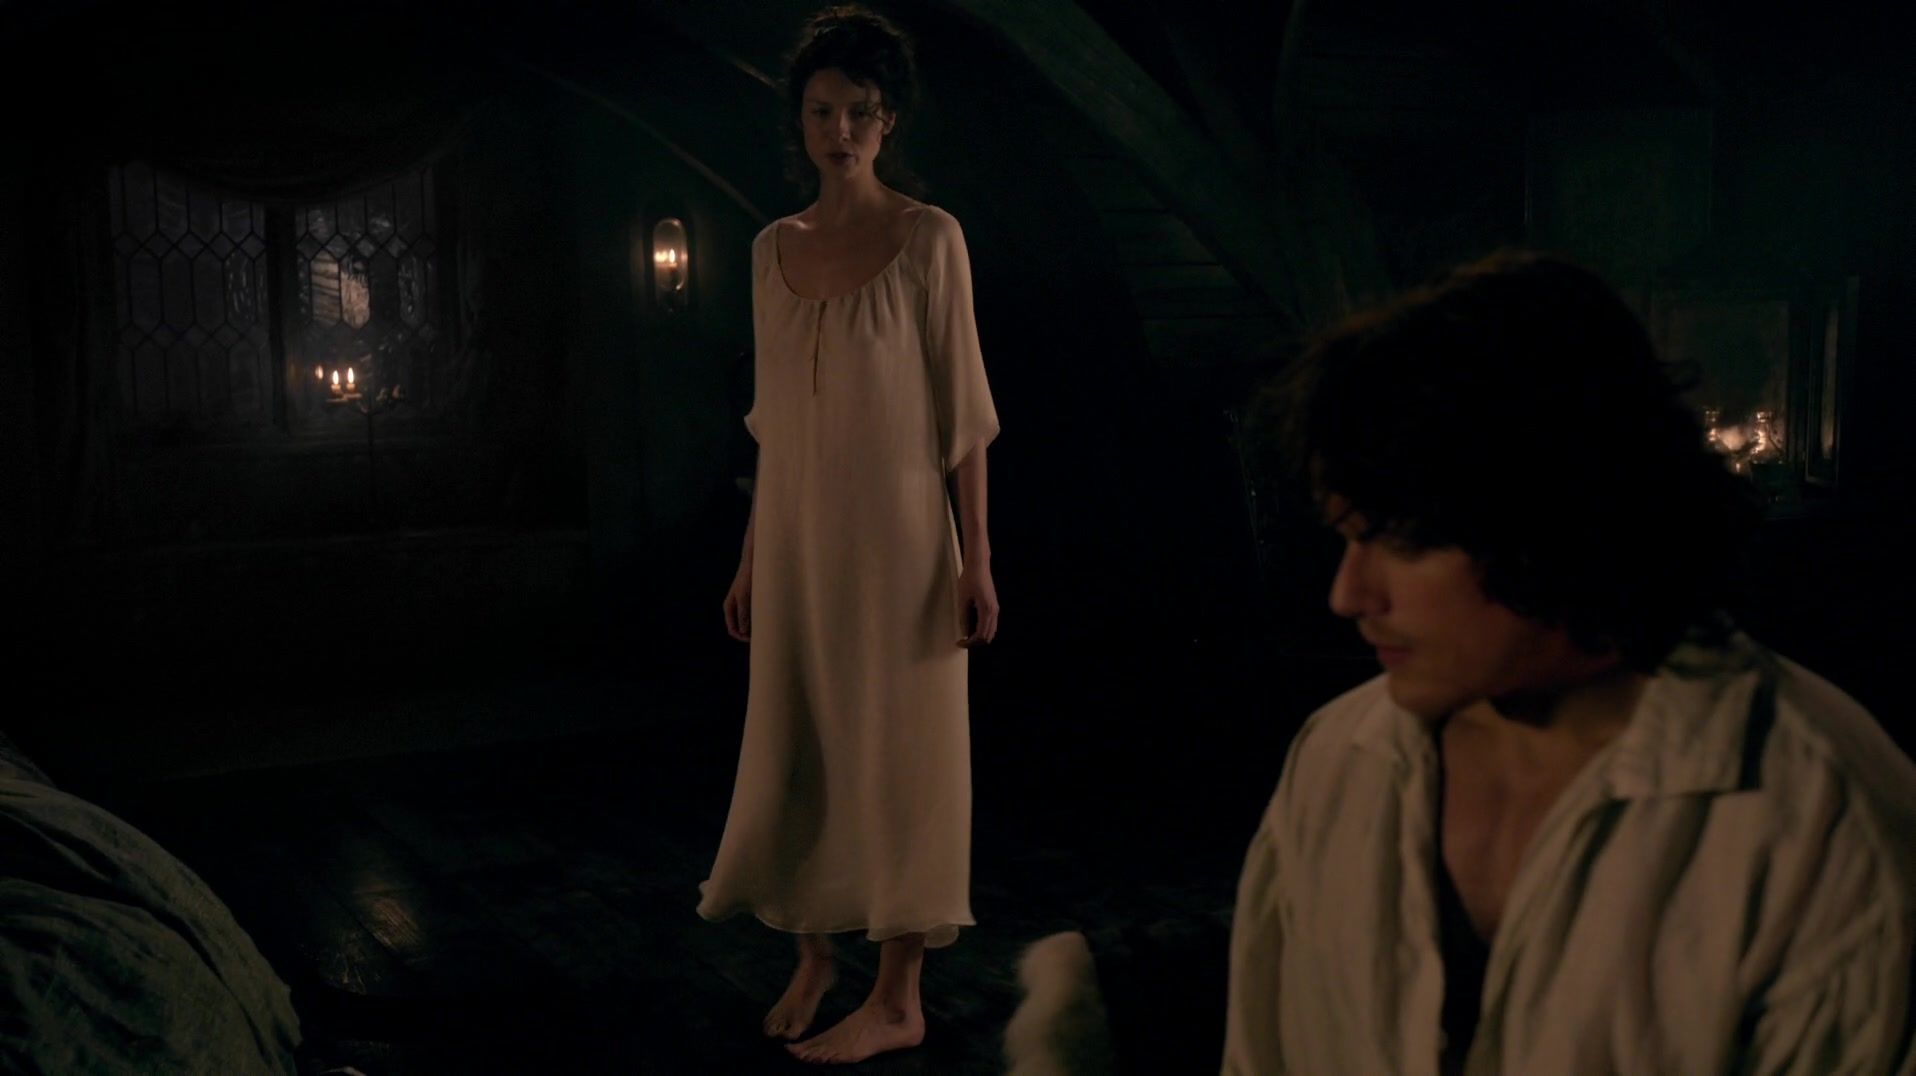 iFapDaily Sex scene of naked Caitriona Balfe | TV show "Outlander" Housewife - 1